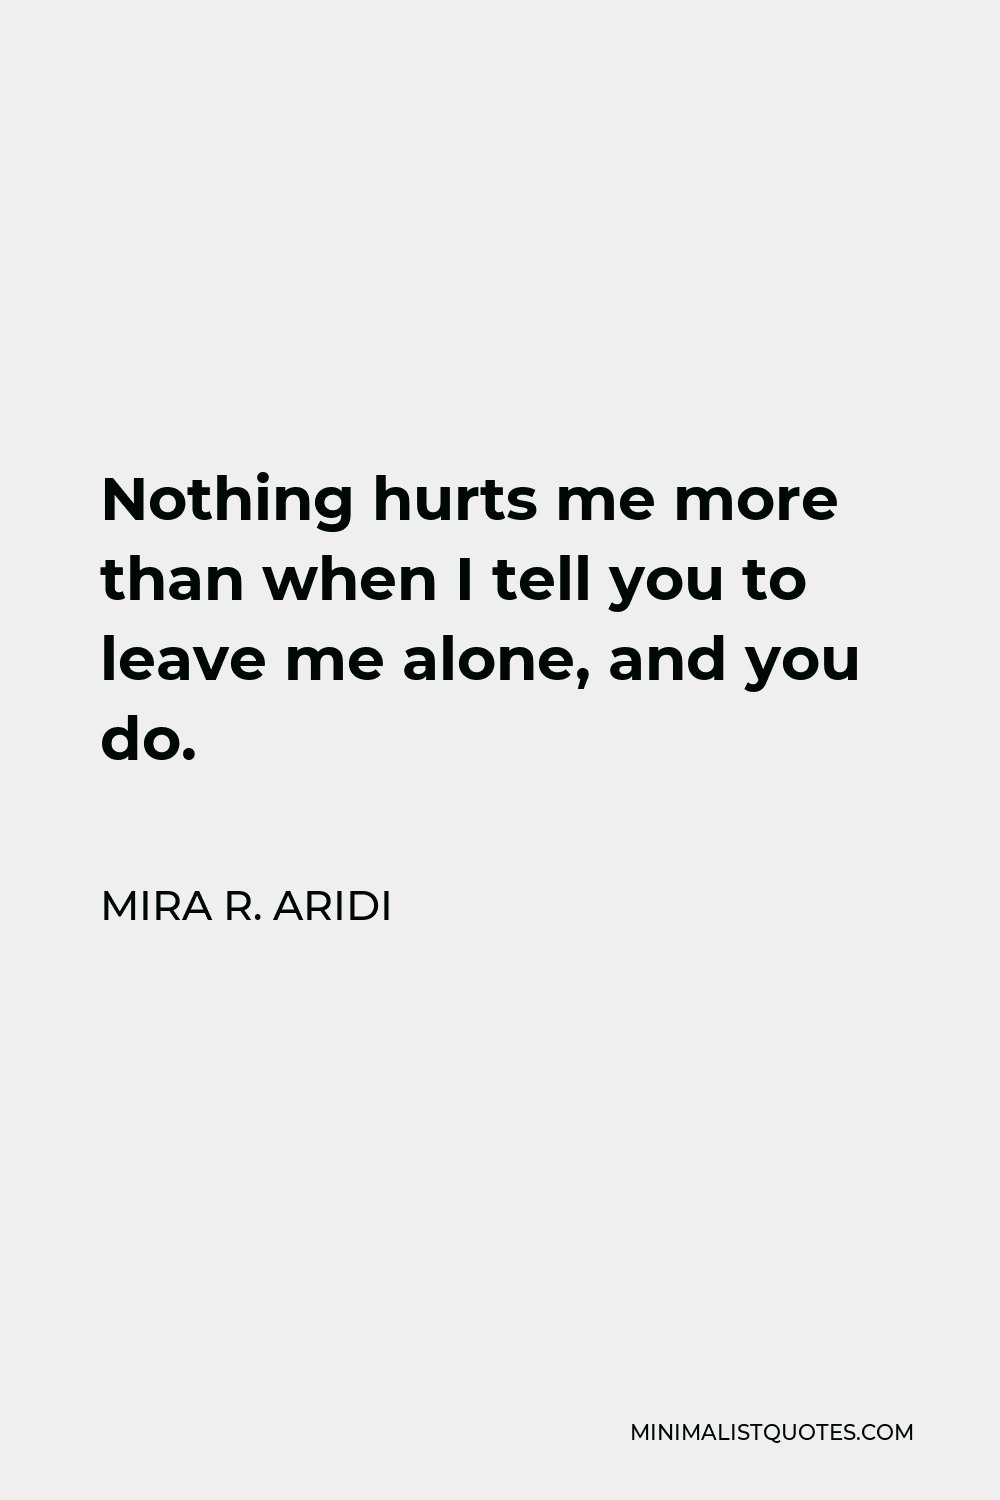 Mira R. Aridi Quote - Nothing hurts me more than when I tell you to leave me alone, and you do.